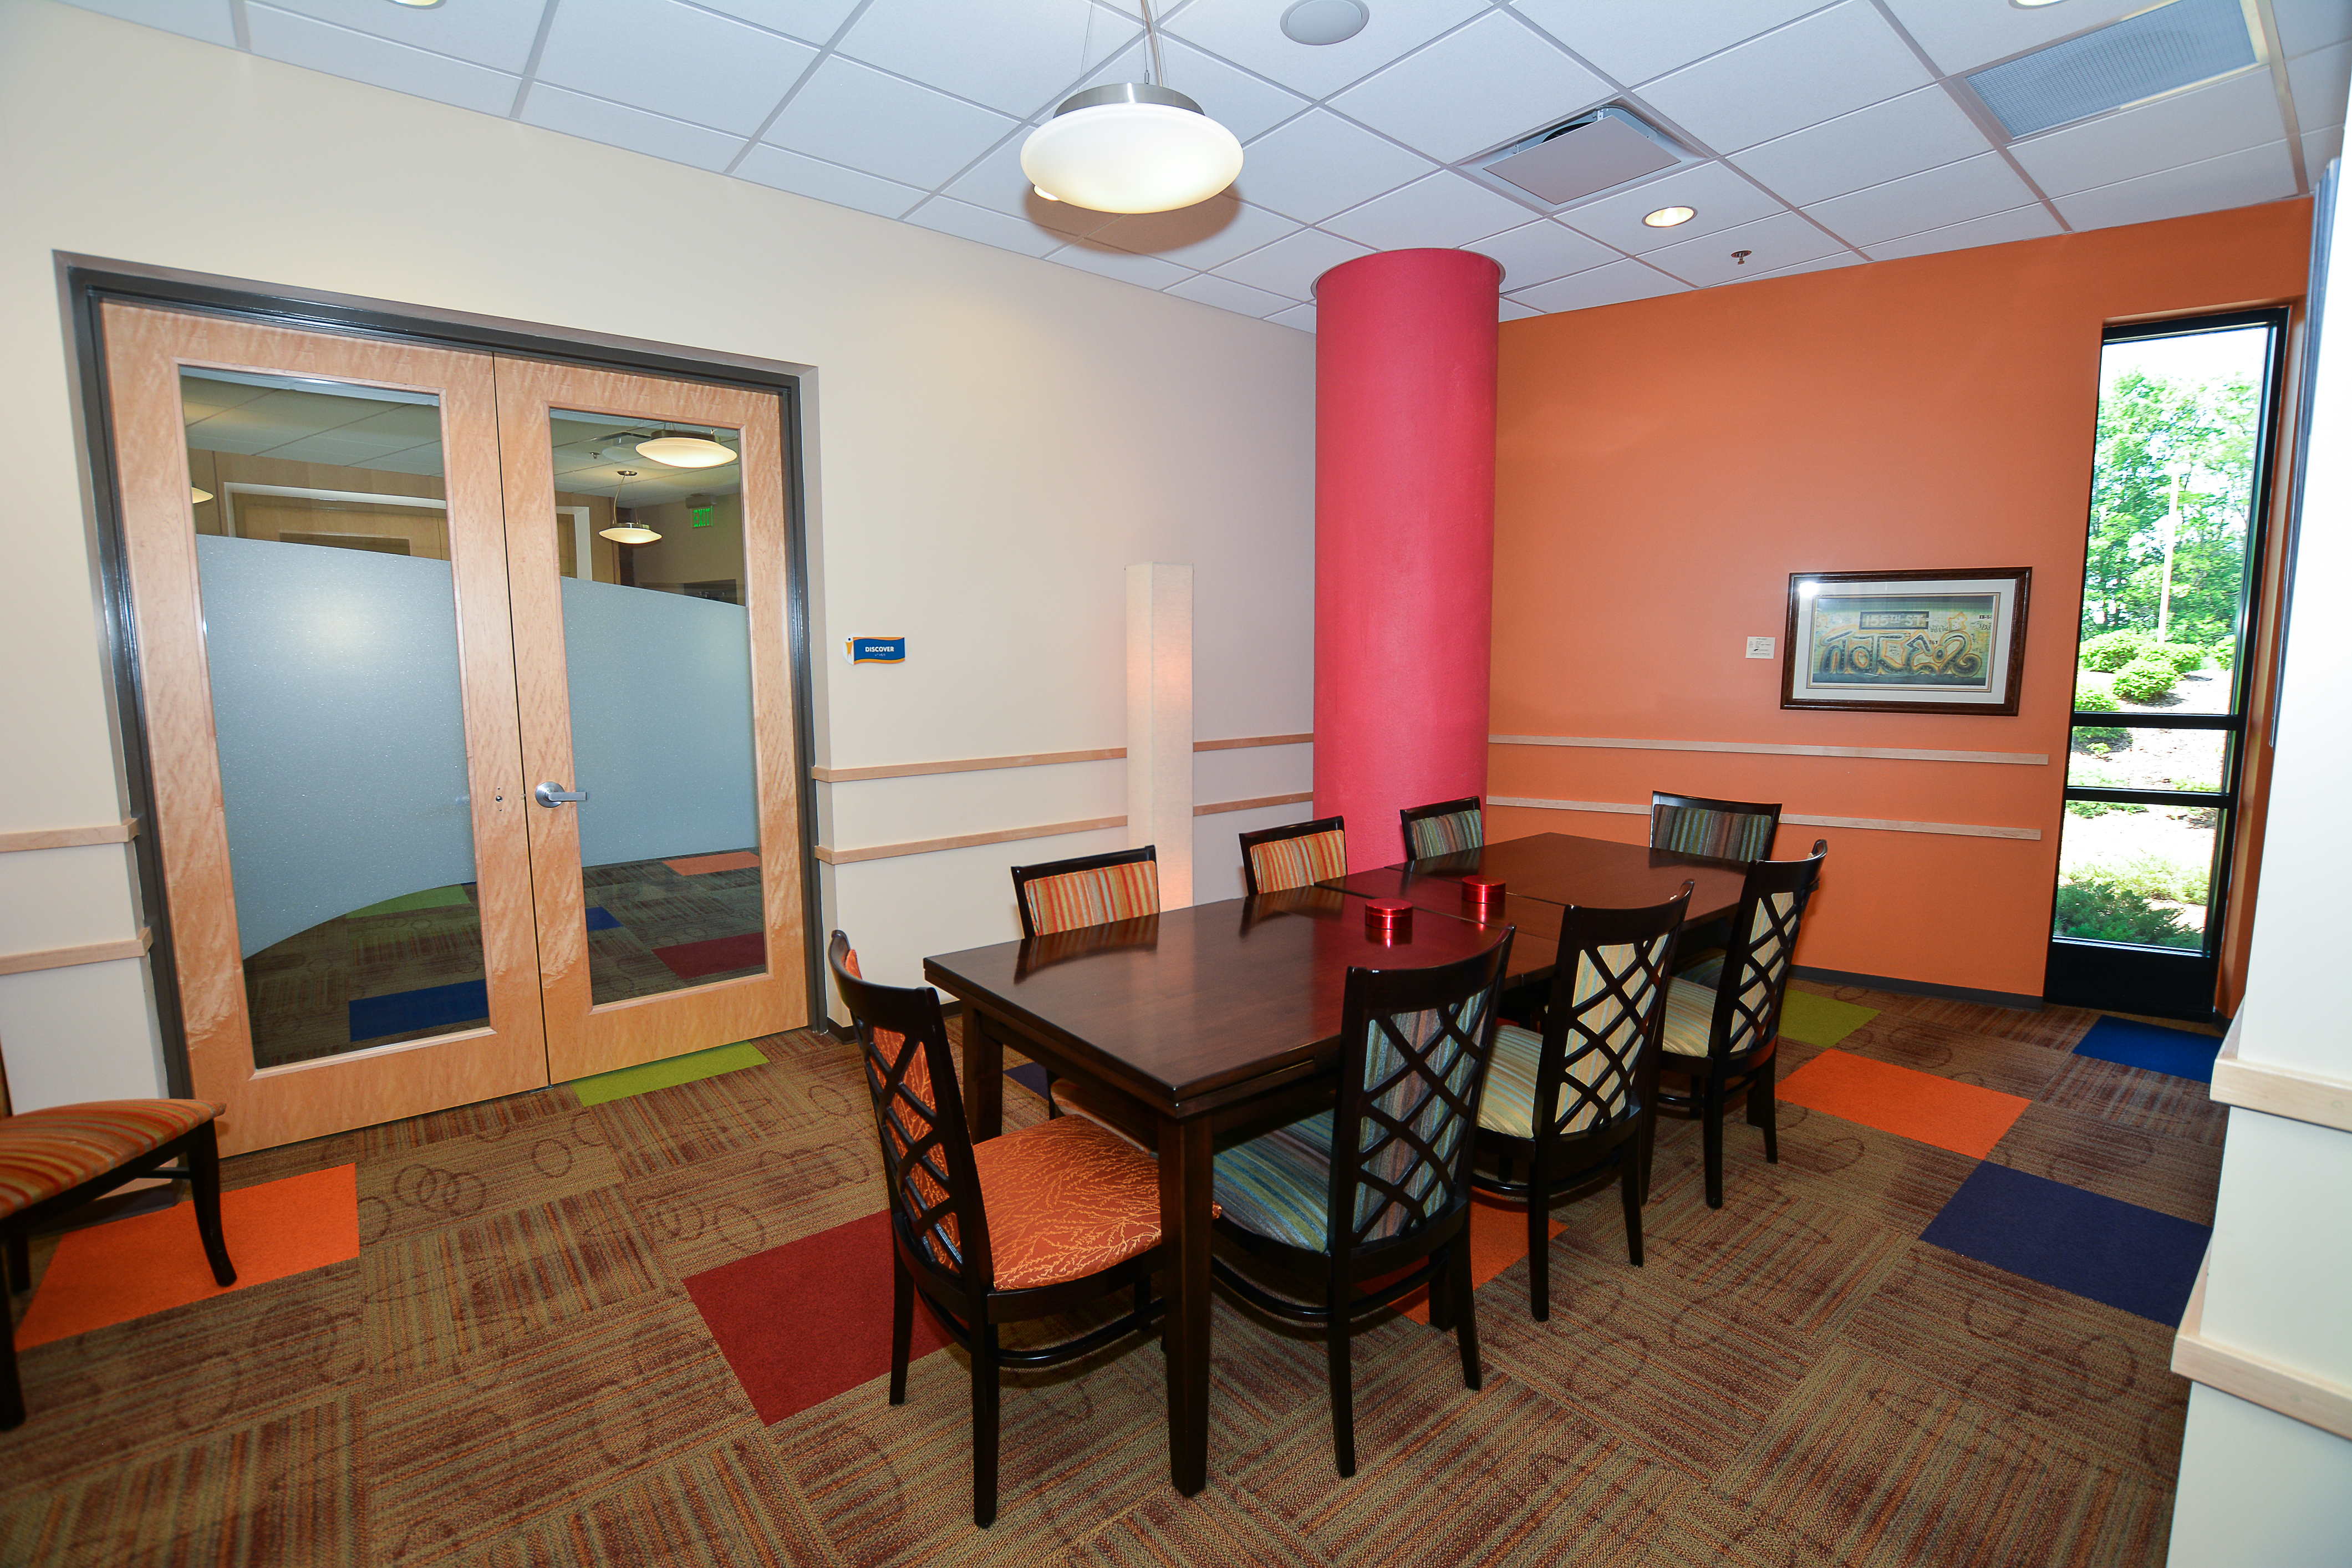 ENGAGE is a casual meeting space that can accommodate groups of no more than 12 people. This casual room is equipped with a wall-mounted television to present with and can be reserved for free if booked within a 2 week timeframe. 